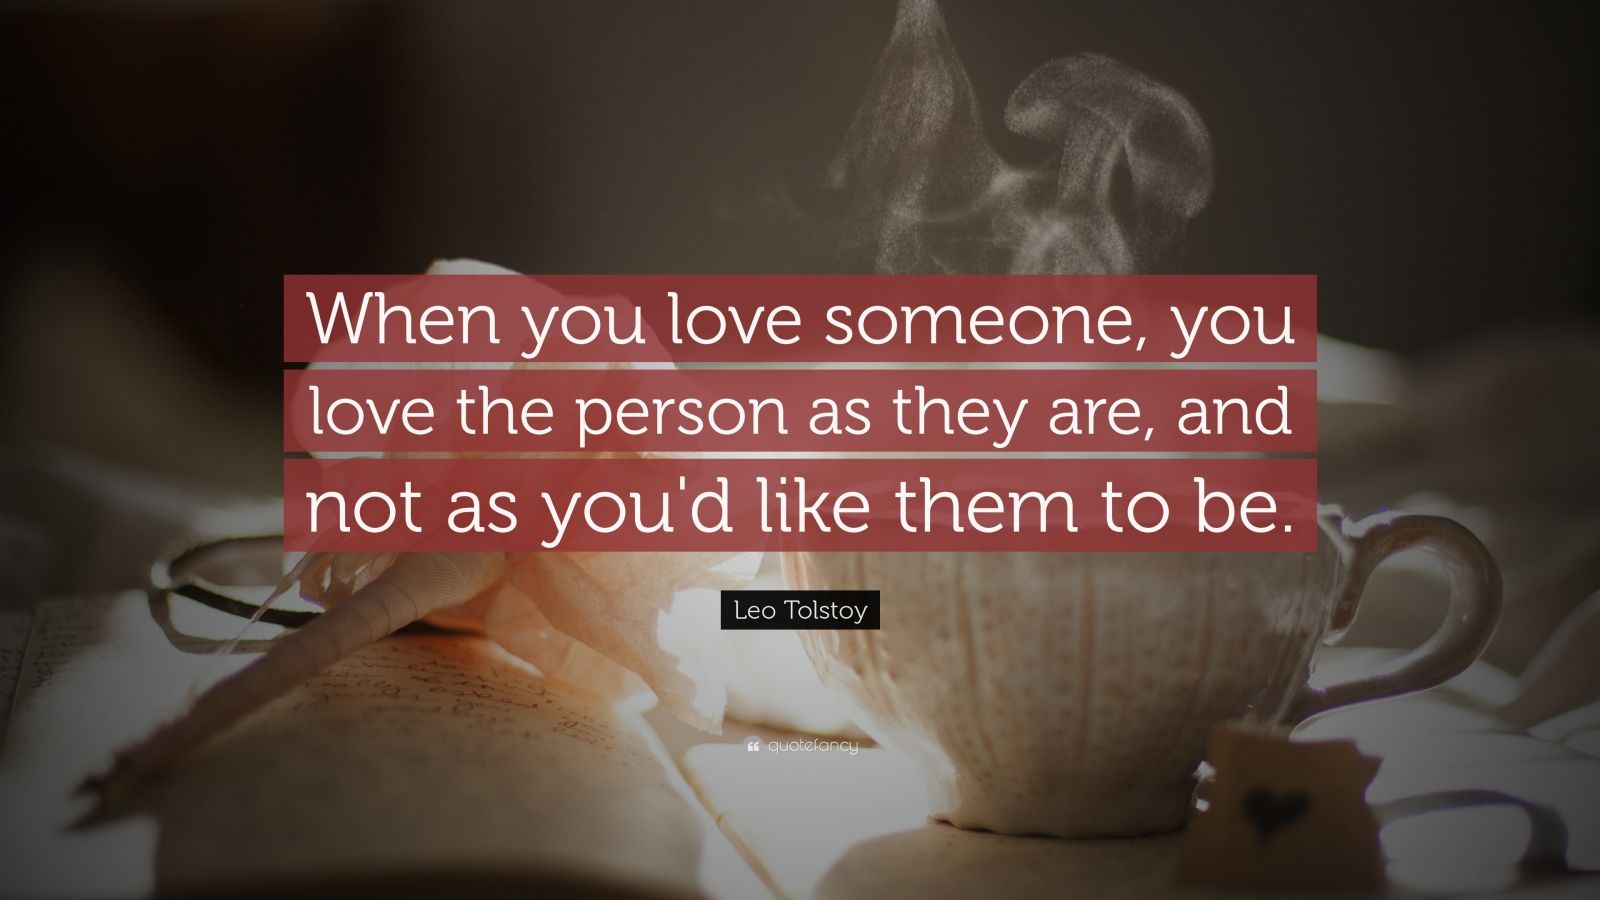 8799 Leo Tolstoy Quote When you love someone you love the person as